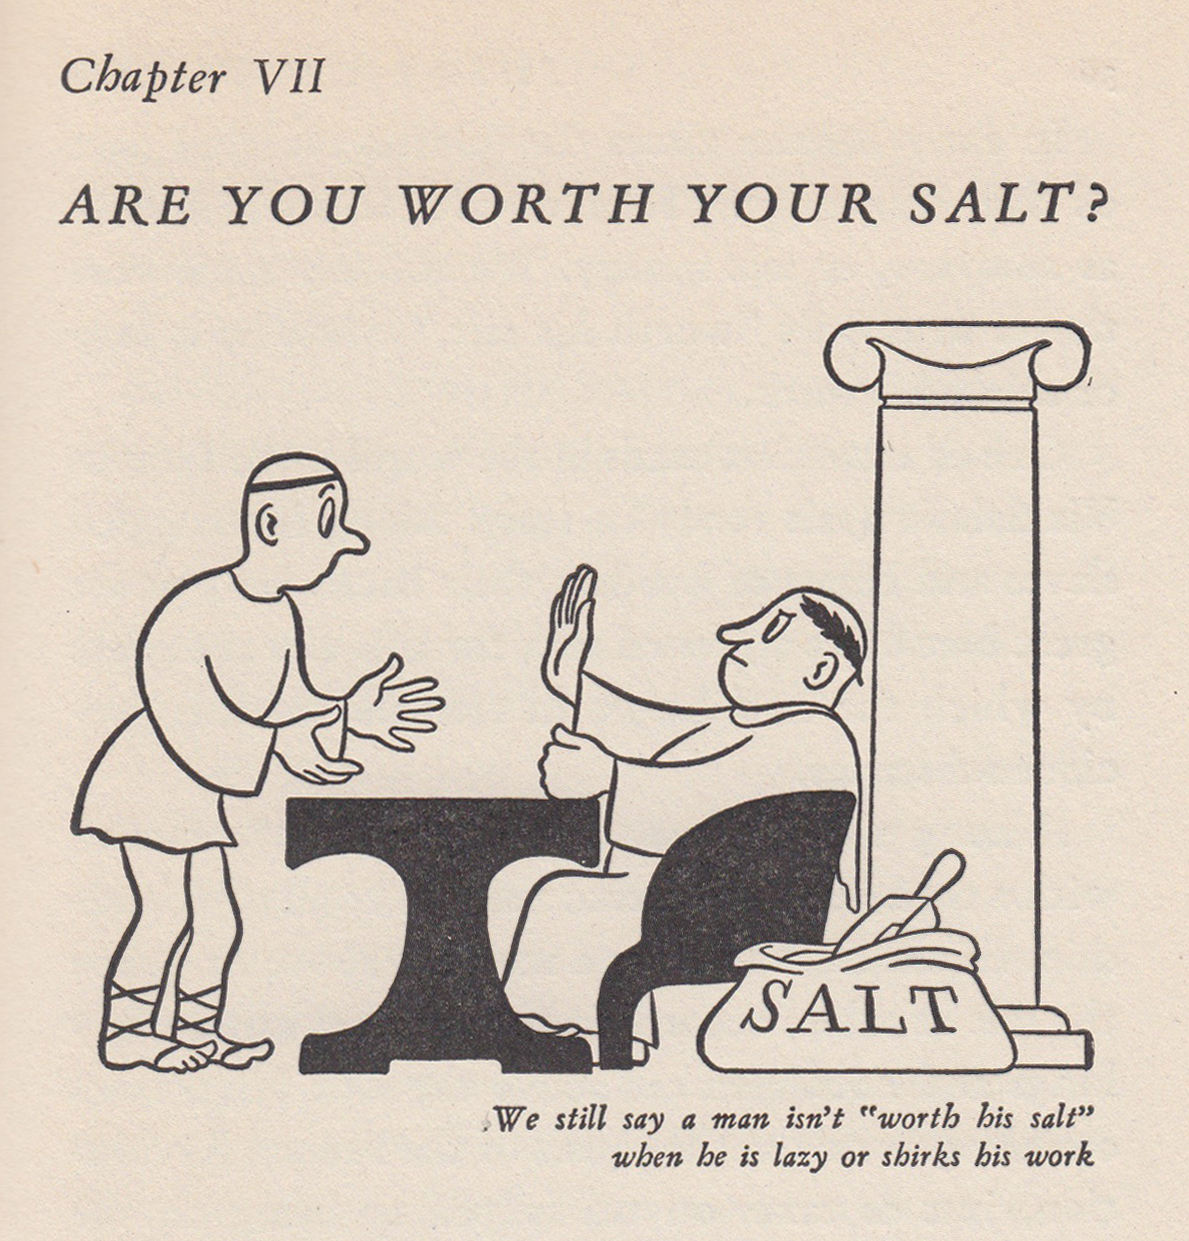 Crockett Johnson, "Are you worth your salt?" from Constance J. Foster, This Rich World: The Story of Money (1943)